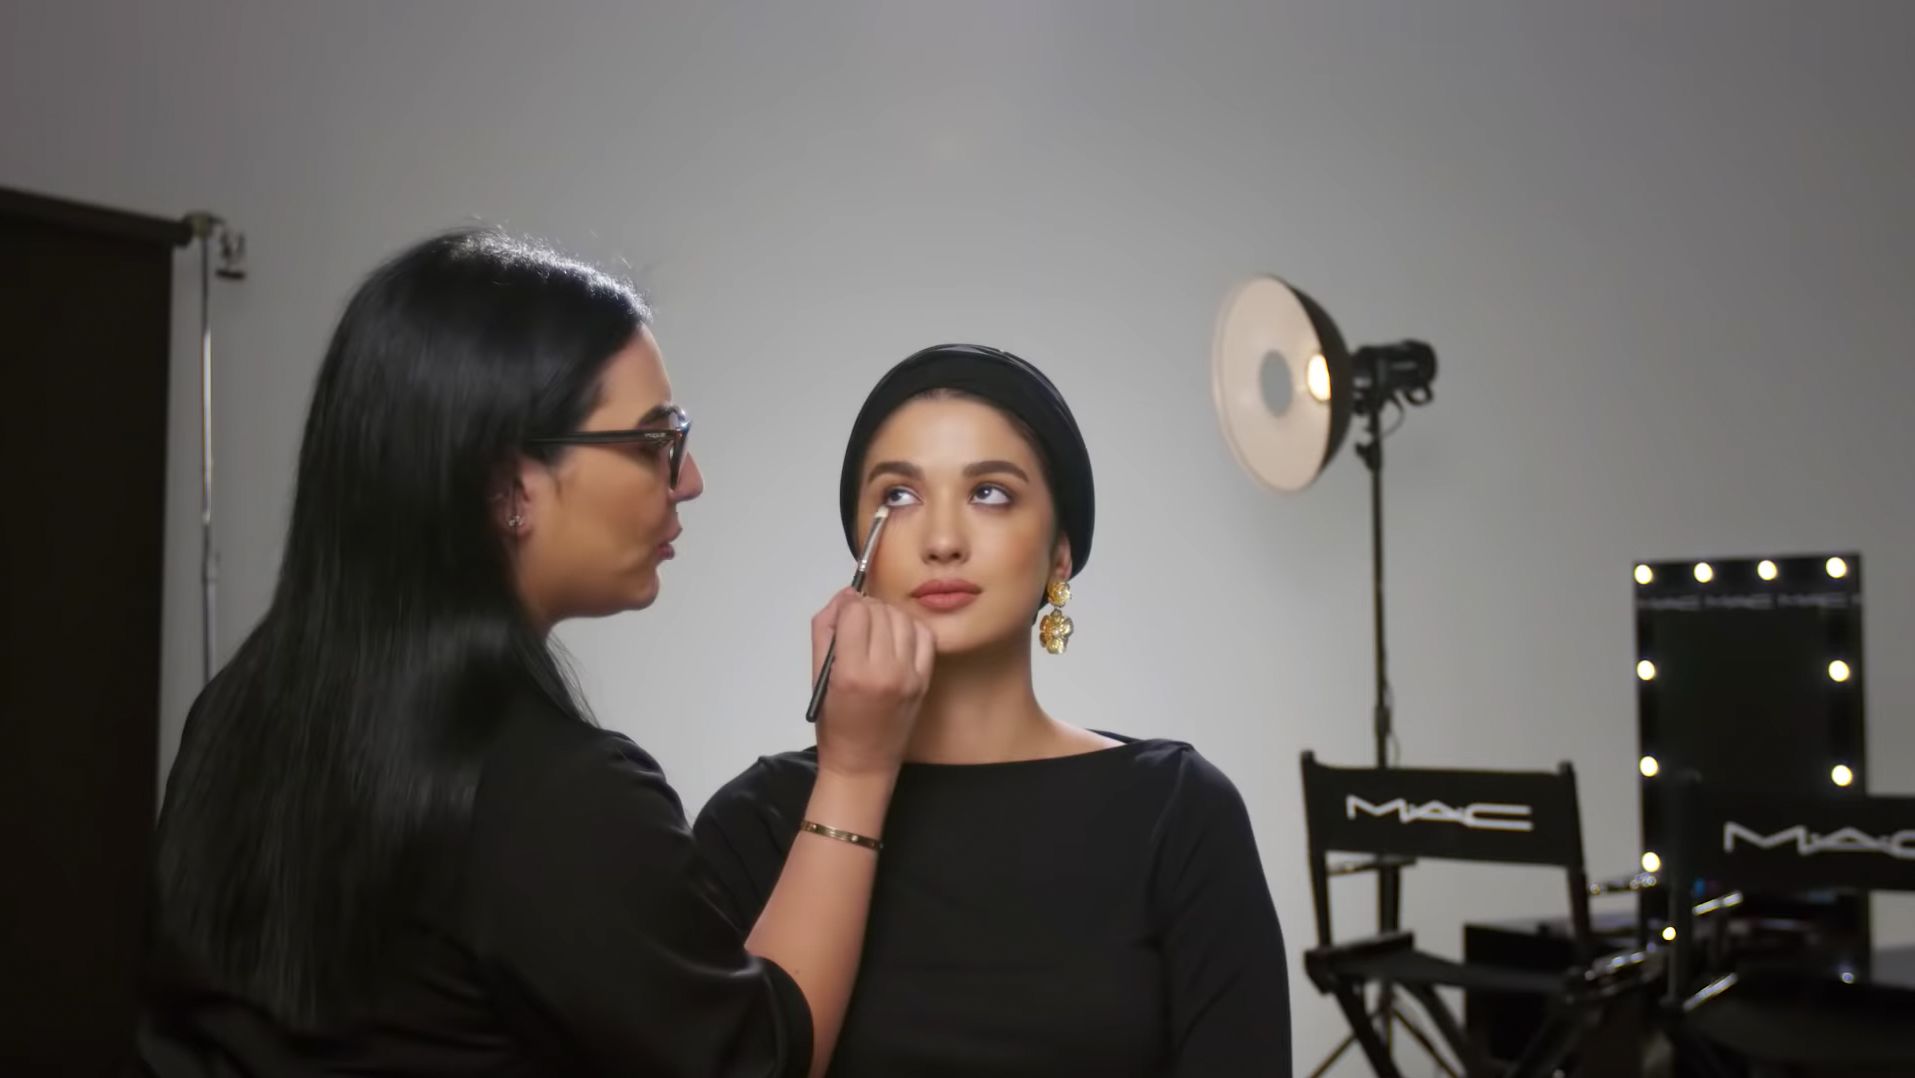 MAC Cosmetics published a video offering Muslim women makeup tips for suhoor.